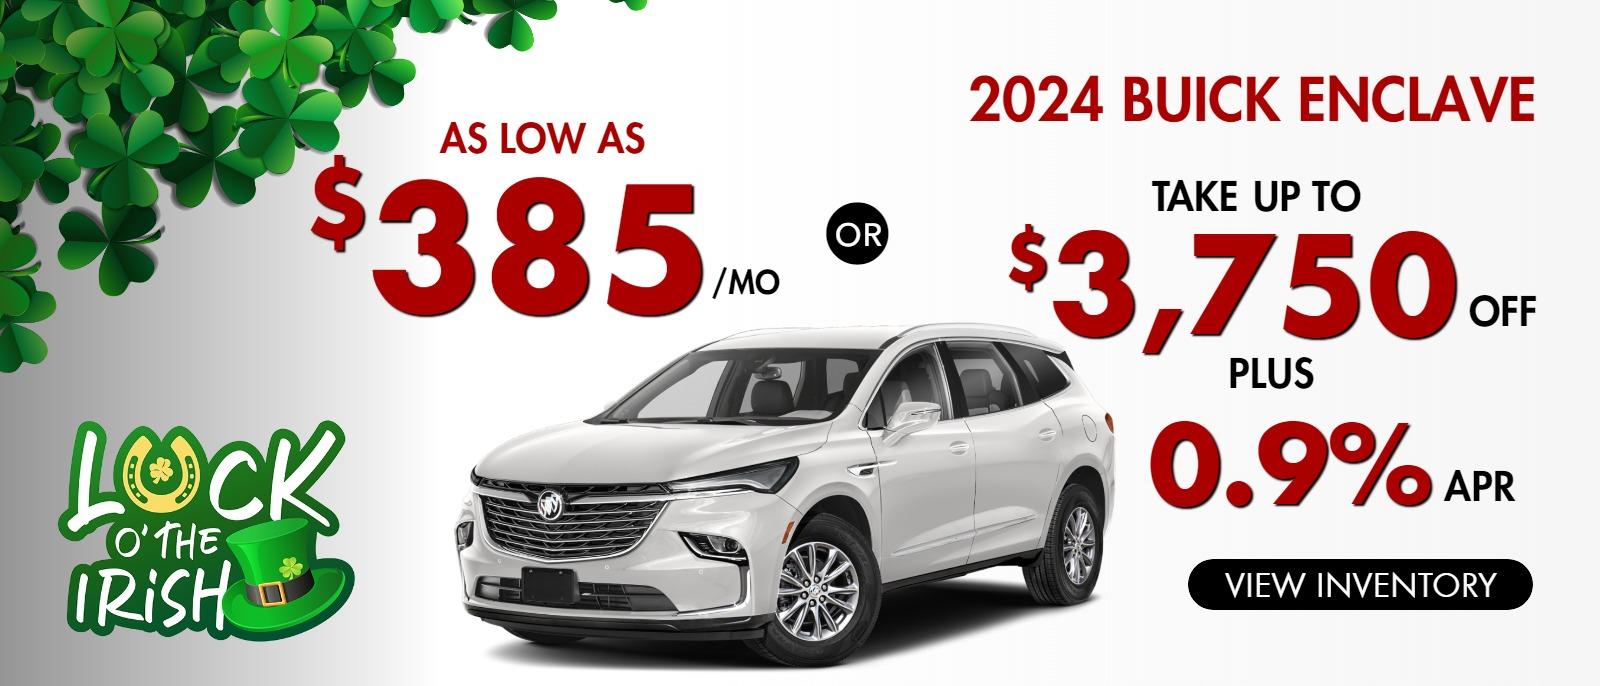 2024 Buick Enclave
Stock B3560

take up to $3750 OFF 
OR AS LOW AS
$385/mo
PLUS
0.9% finance